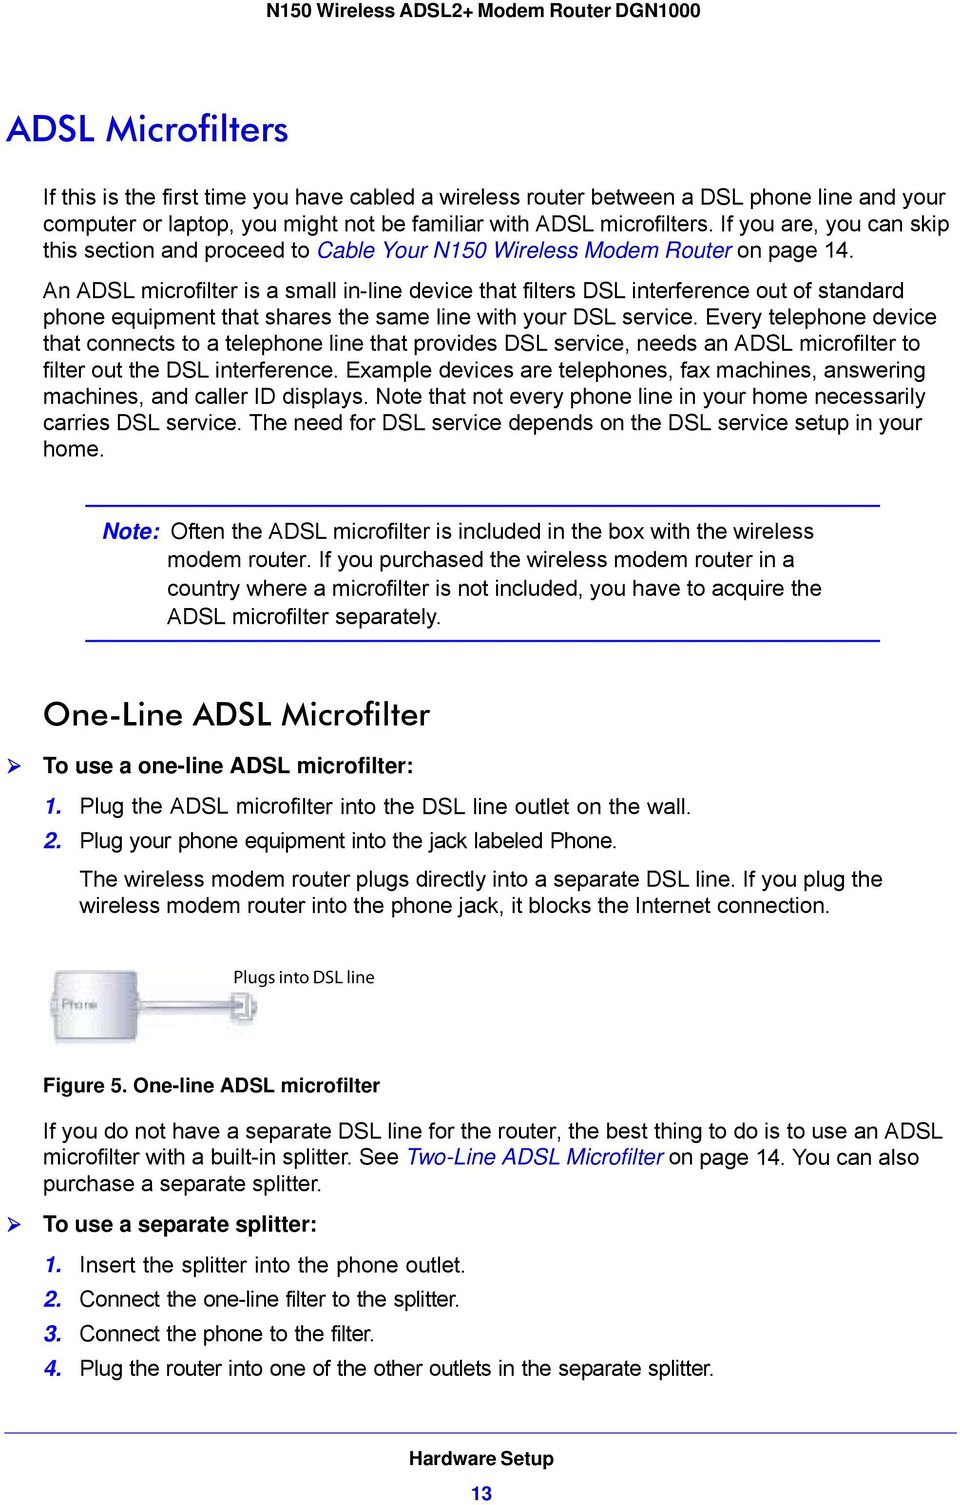 An ADSL microfilter is a small in-line device that filters DSL interference out of standard phone equipment that shares the same line with your DSL service.